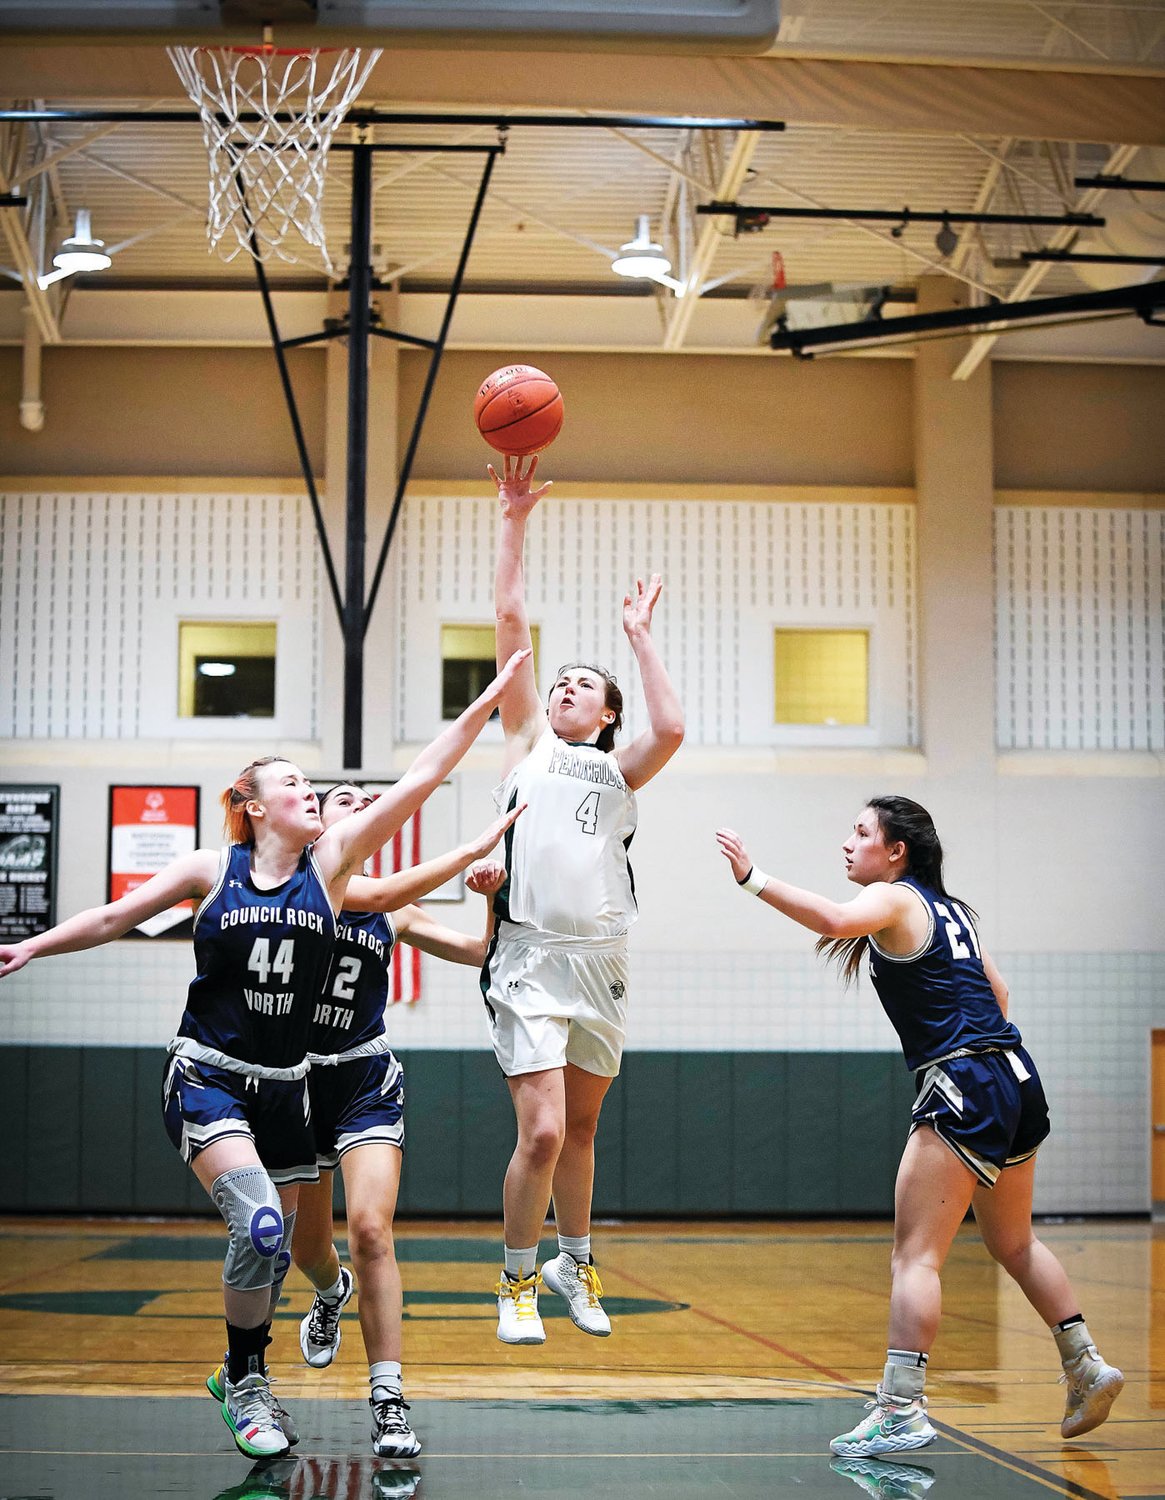 Pennridge’s Katie Yoder splits the CR North defense for two of her game-high 20 points.